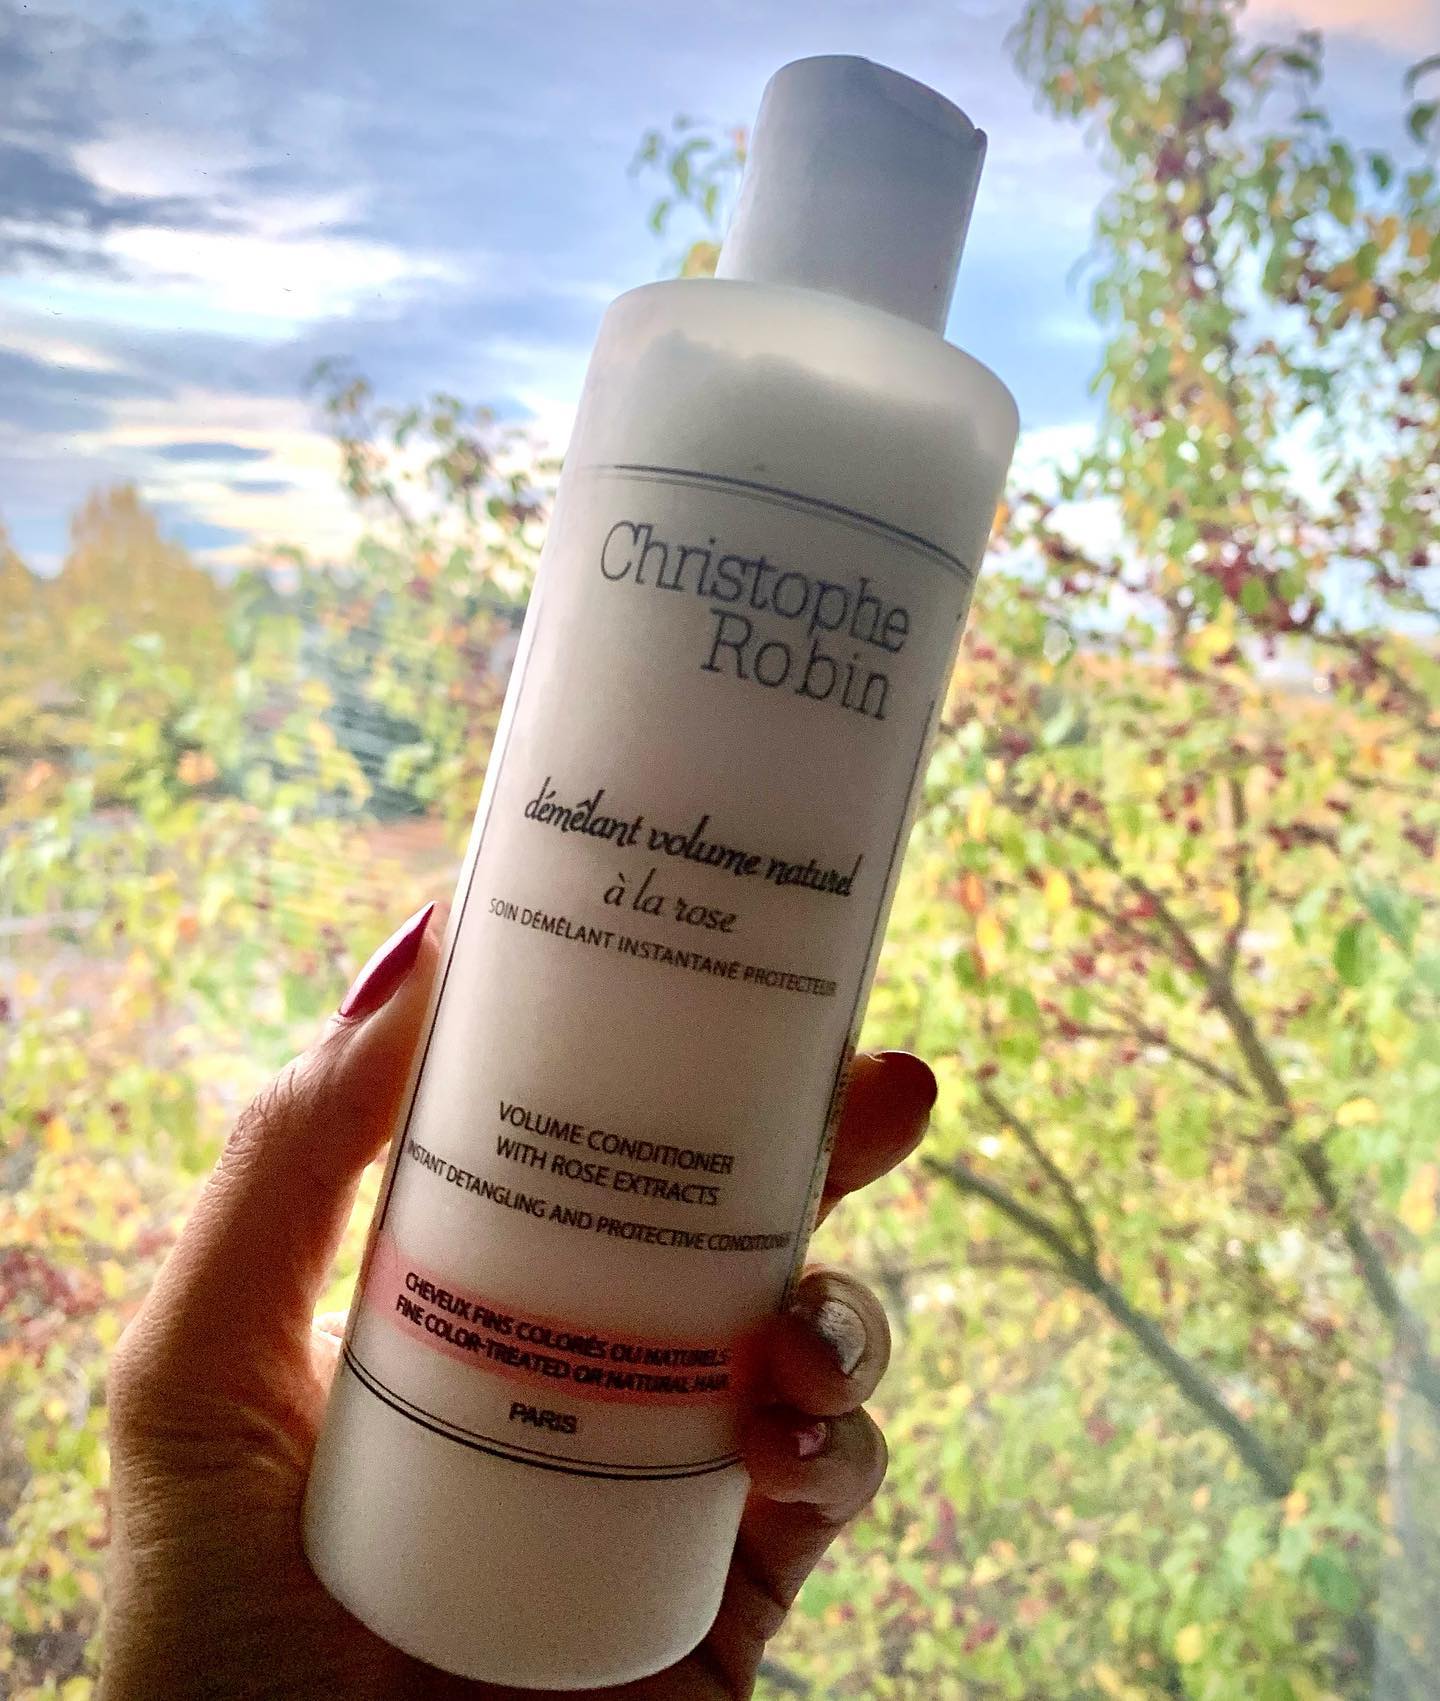 Christophe Robin Volume Conditioner Review | Canadian Beauty